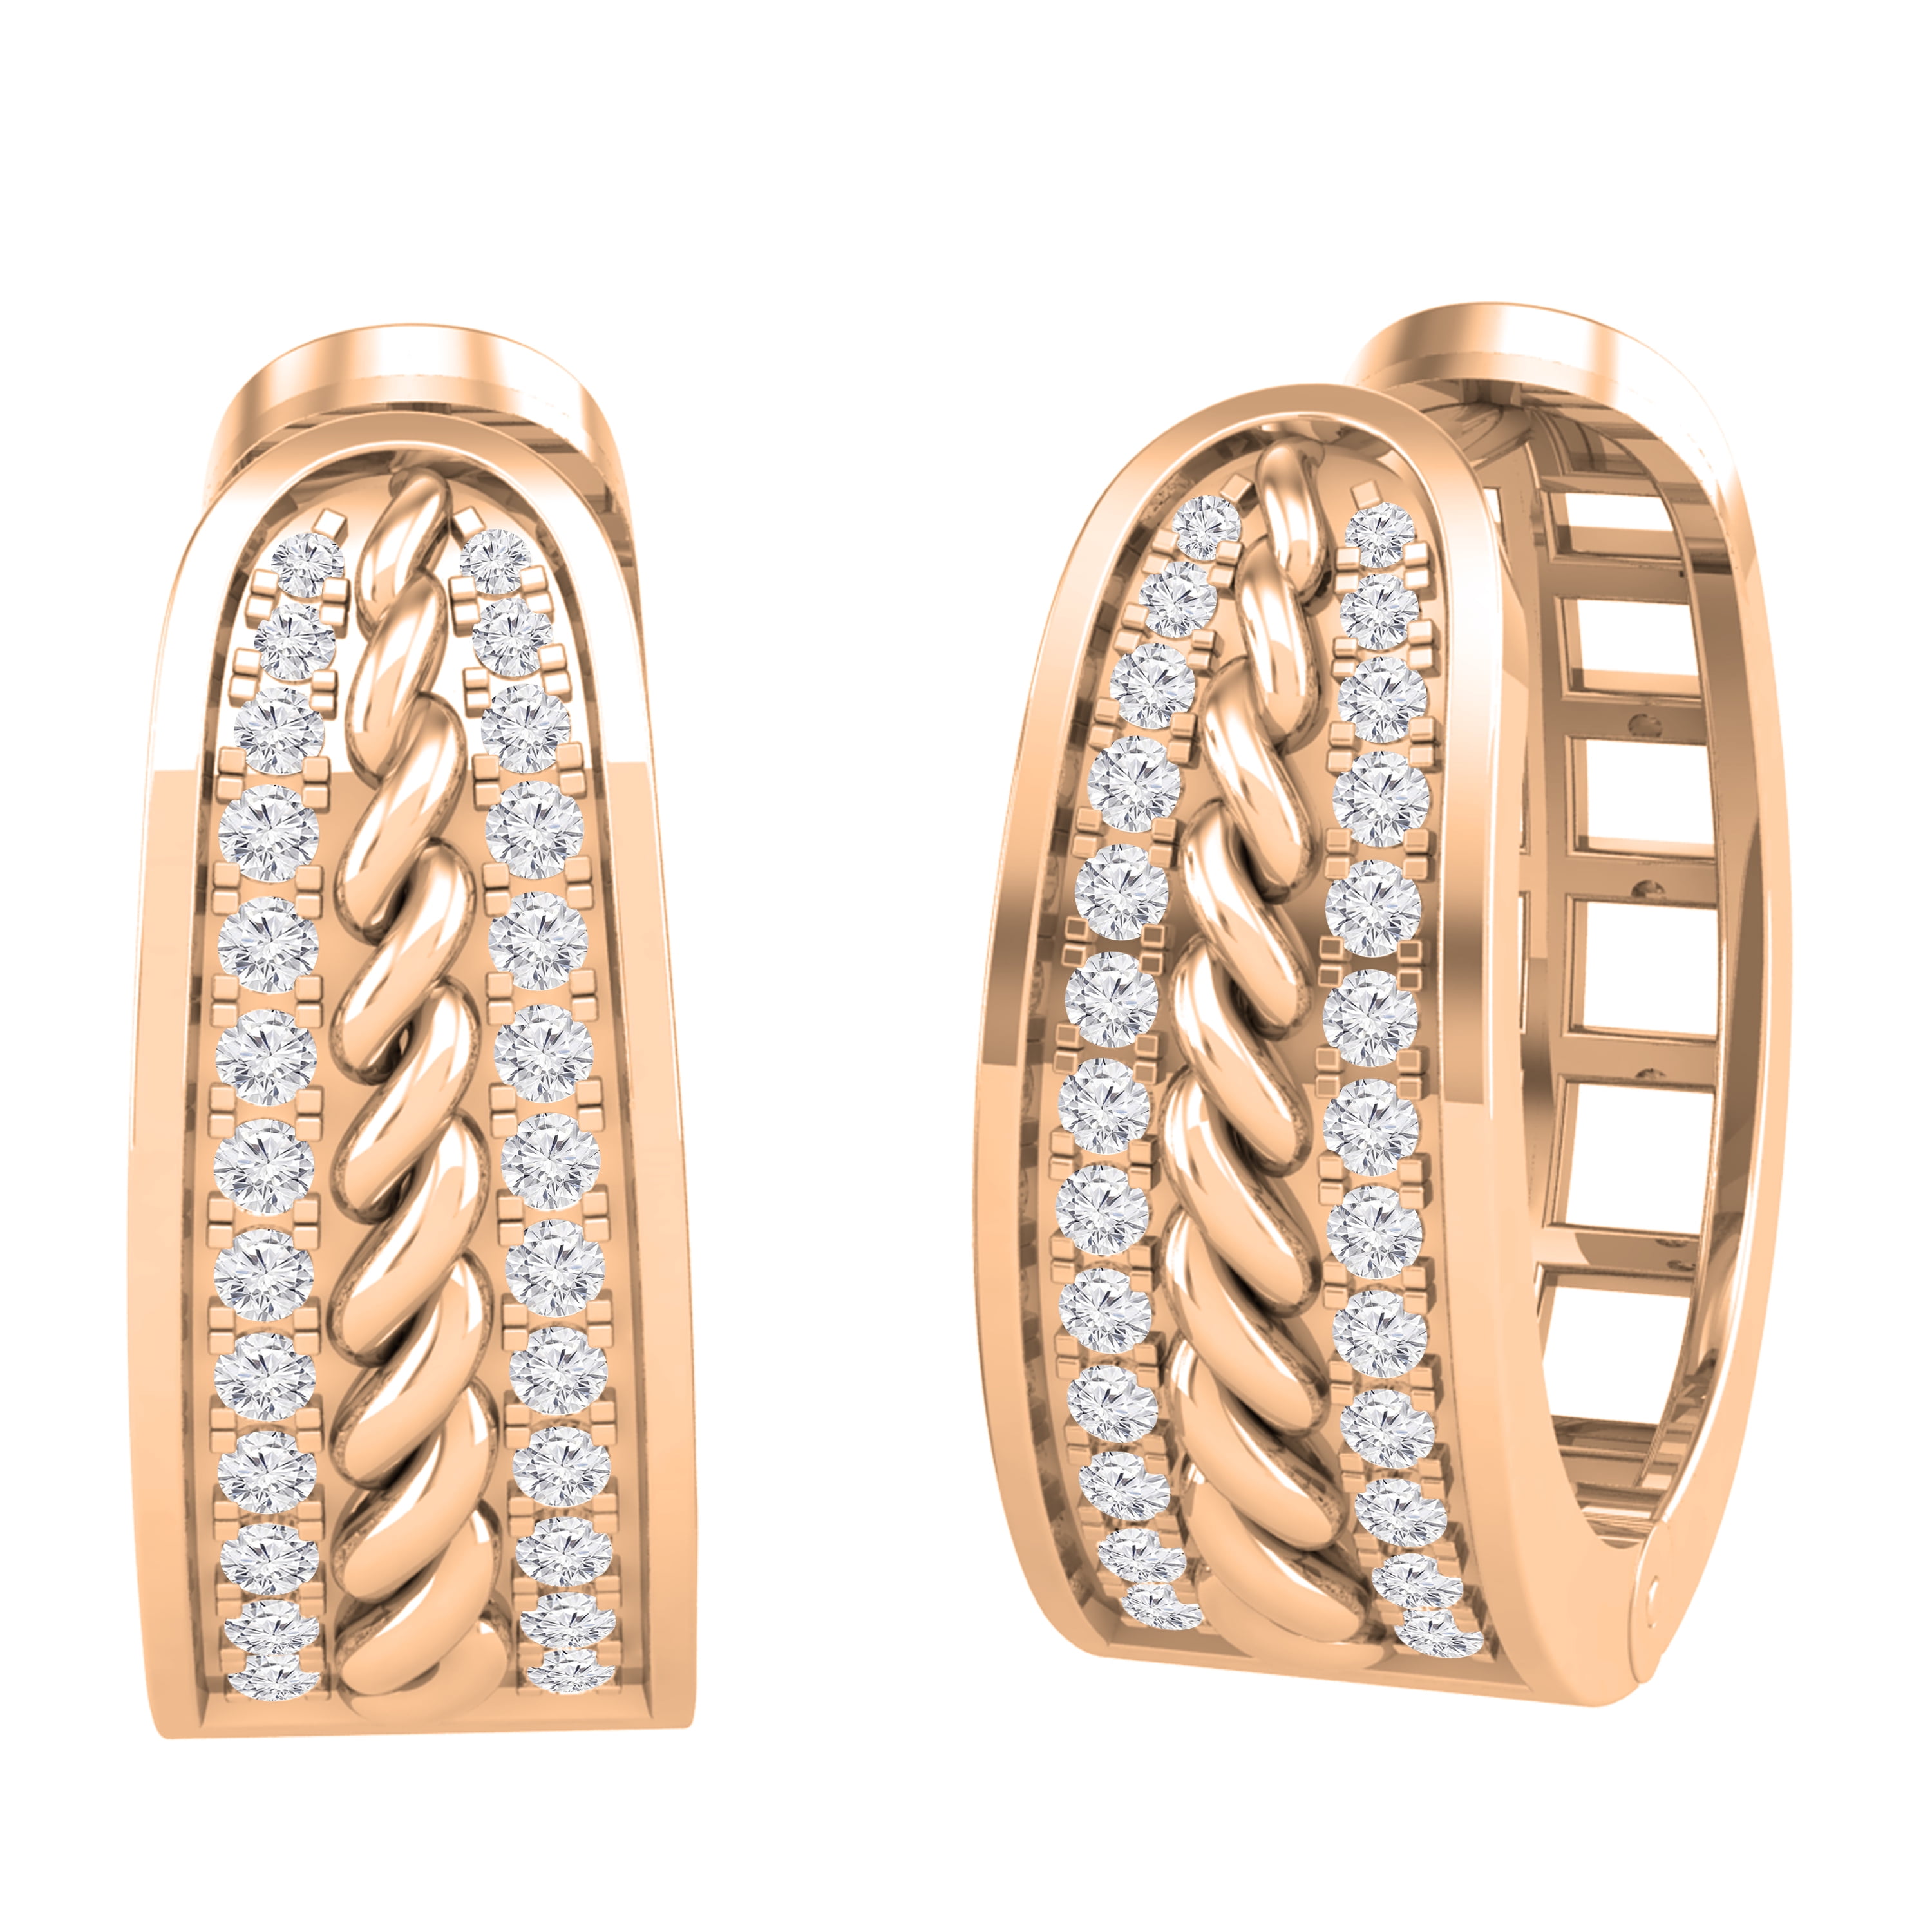 Details about   14K Yellow Gold Finish 2.00 Ct Round Cut D/VVS1 Diamond Hoop/Huggie Earrings 